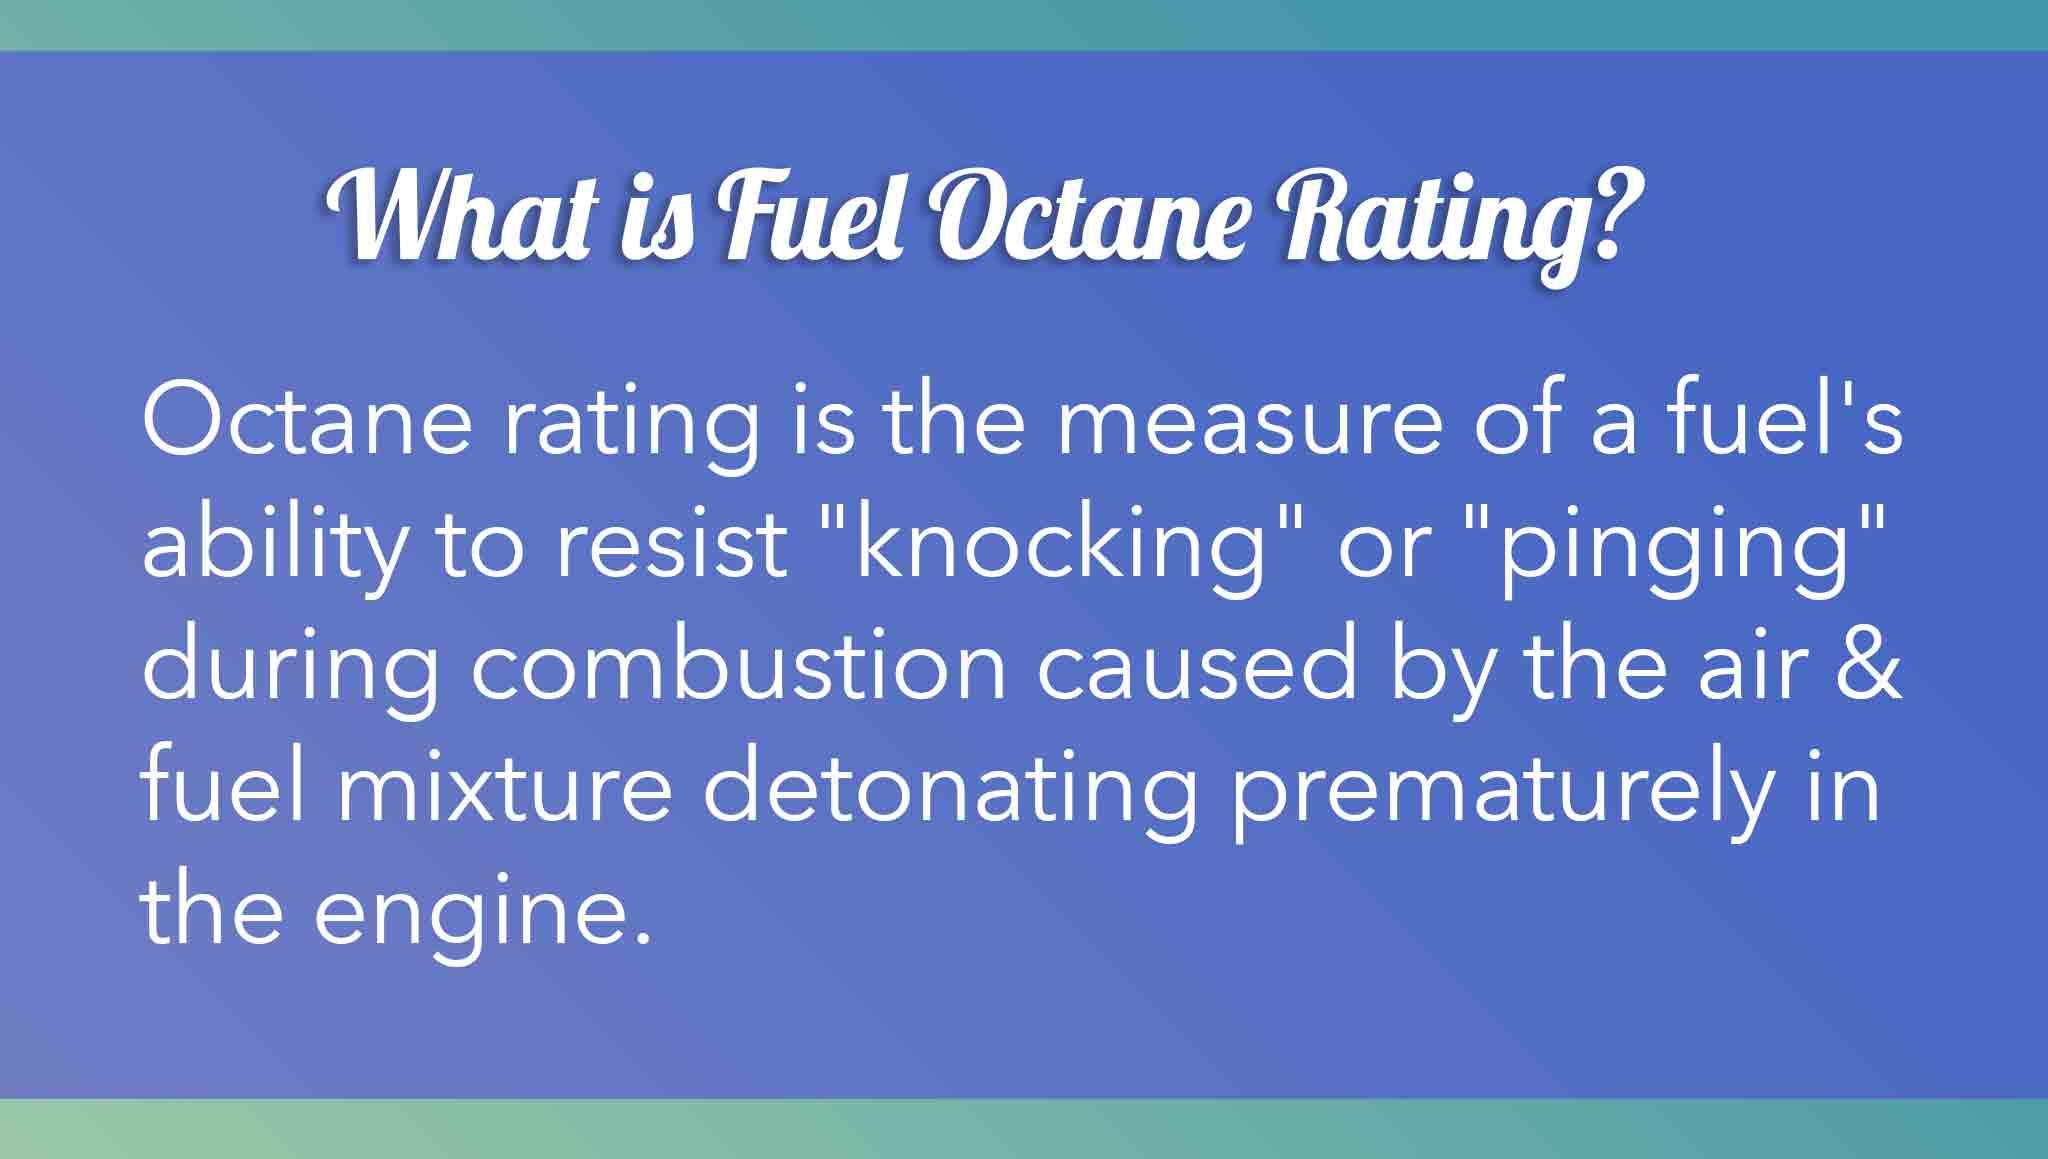 Octane rating is the measure of a fuel's ability to resist "knocking" or "pinging" during combustion caused by the air & fuel mixture detonating prematurely in the engine.